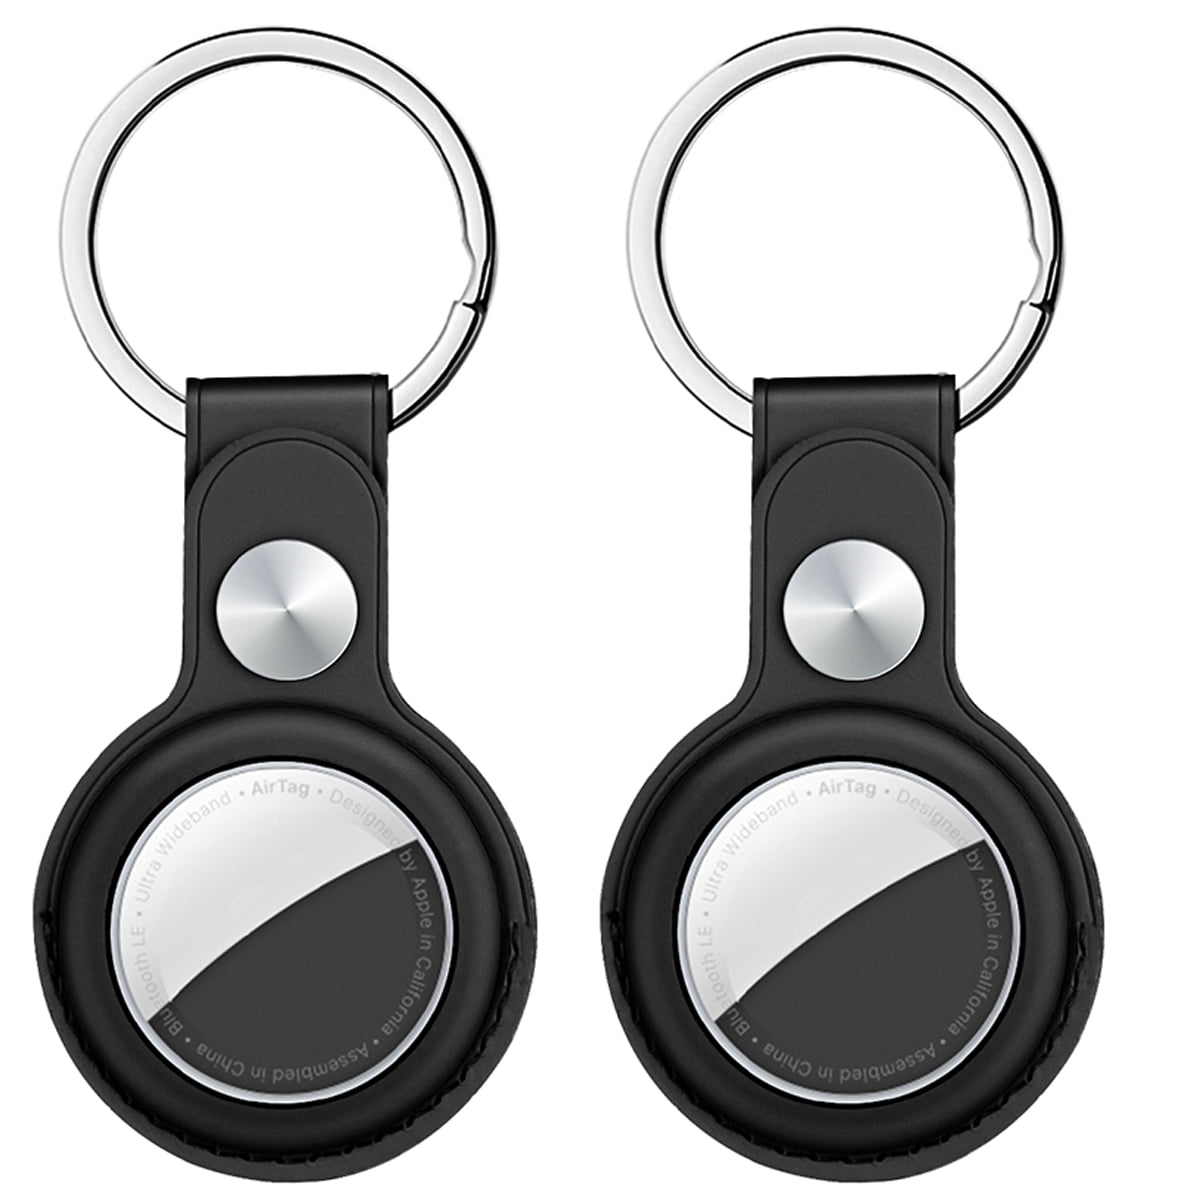 2PACKS Keychain Compatible for Airtags Case,Airtag Holder Keychain Keyring,Air tag Protective Case Cover with Key Ring Silicone Airtag Case Black